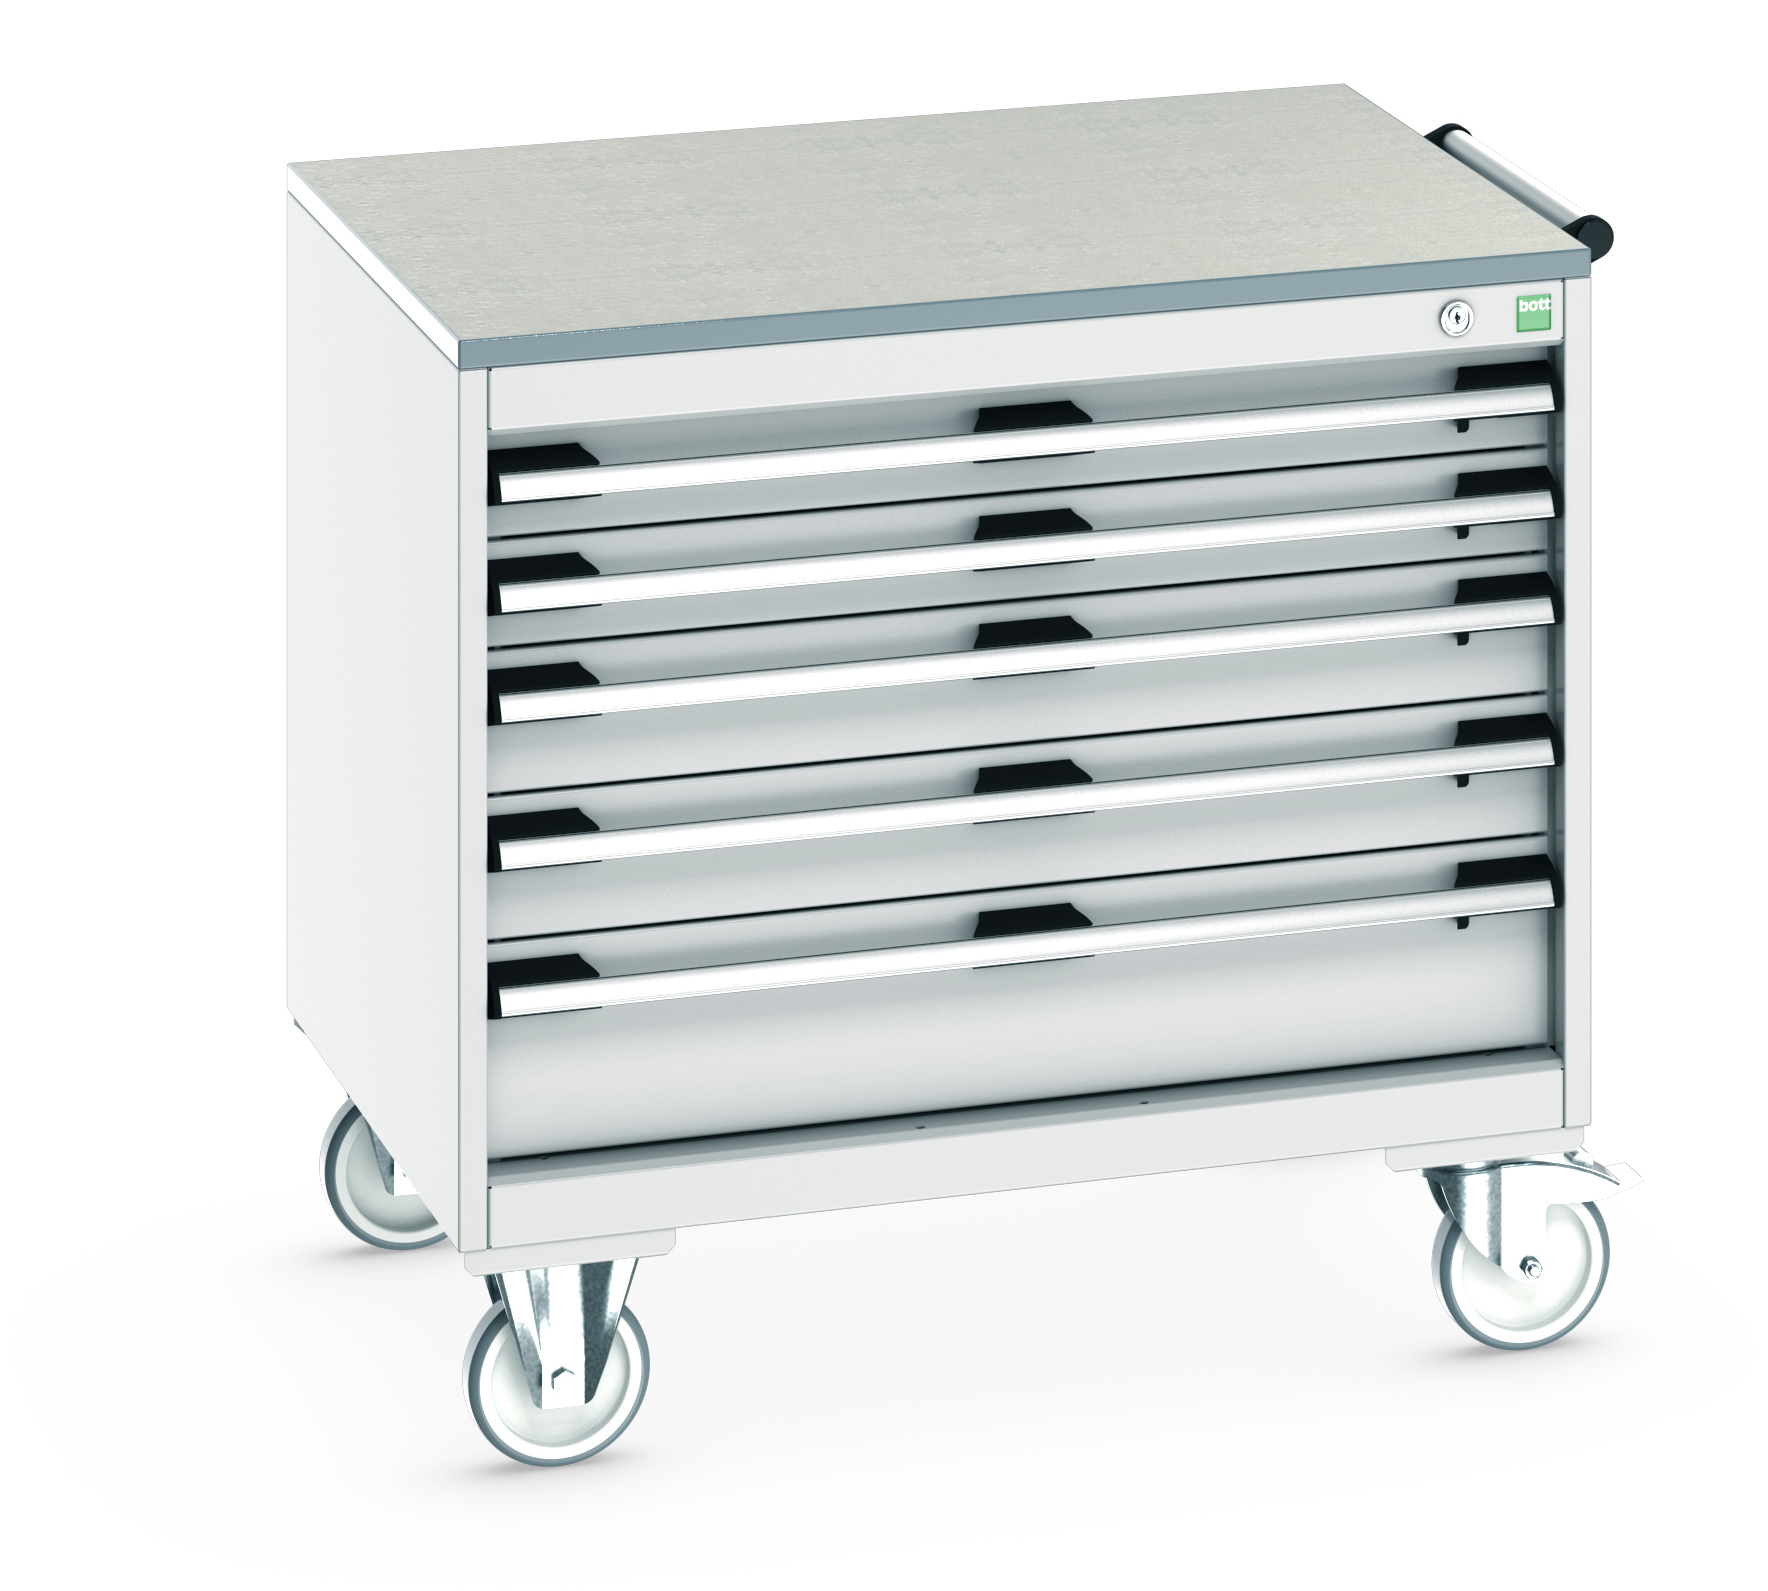 Bott Cubio Mobile Drawer Cabinet With 5 Drawers & Lino Worktop - 40402154.16V